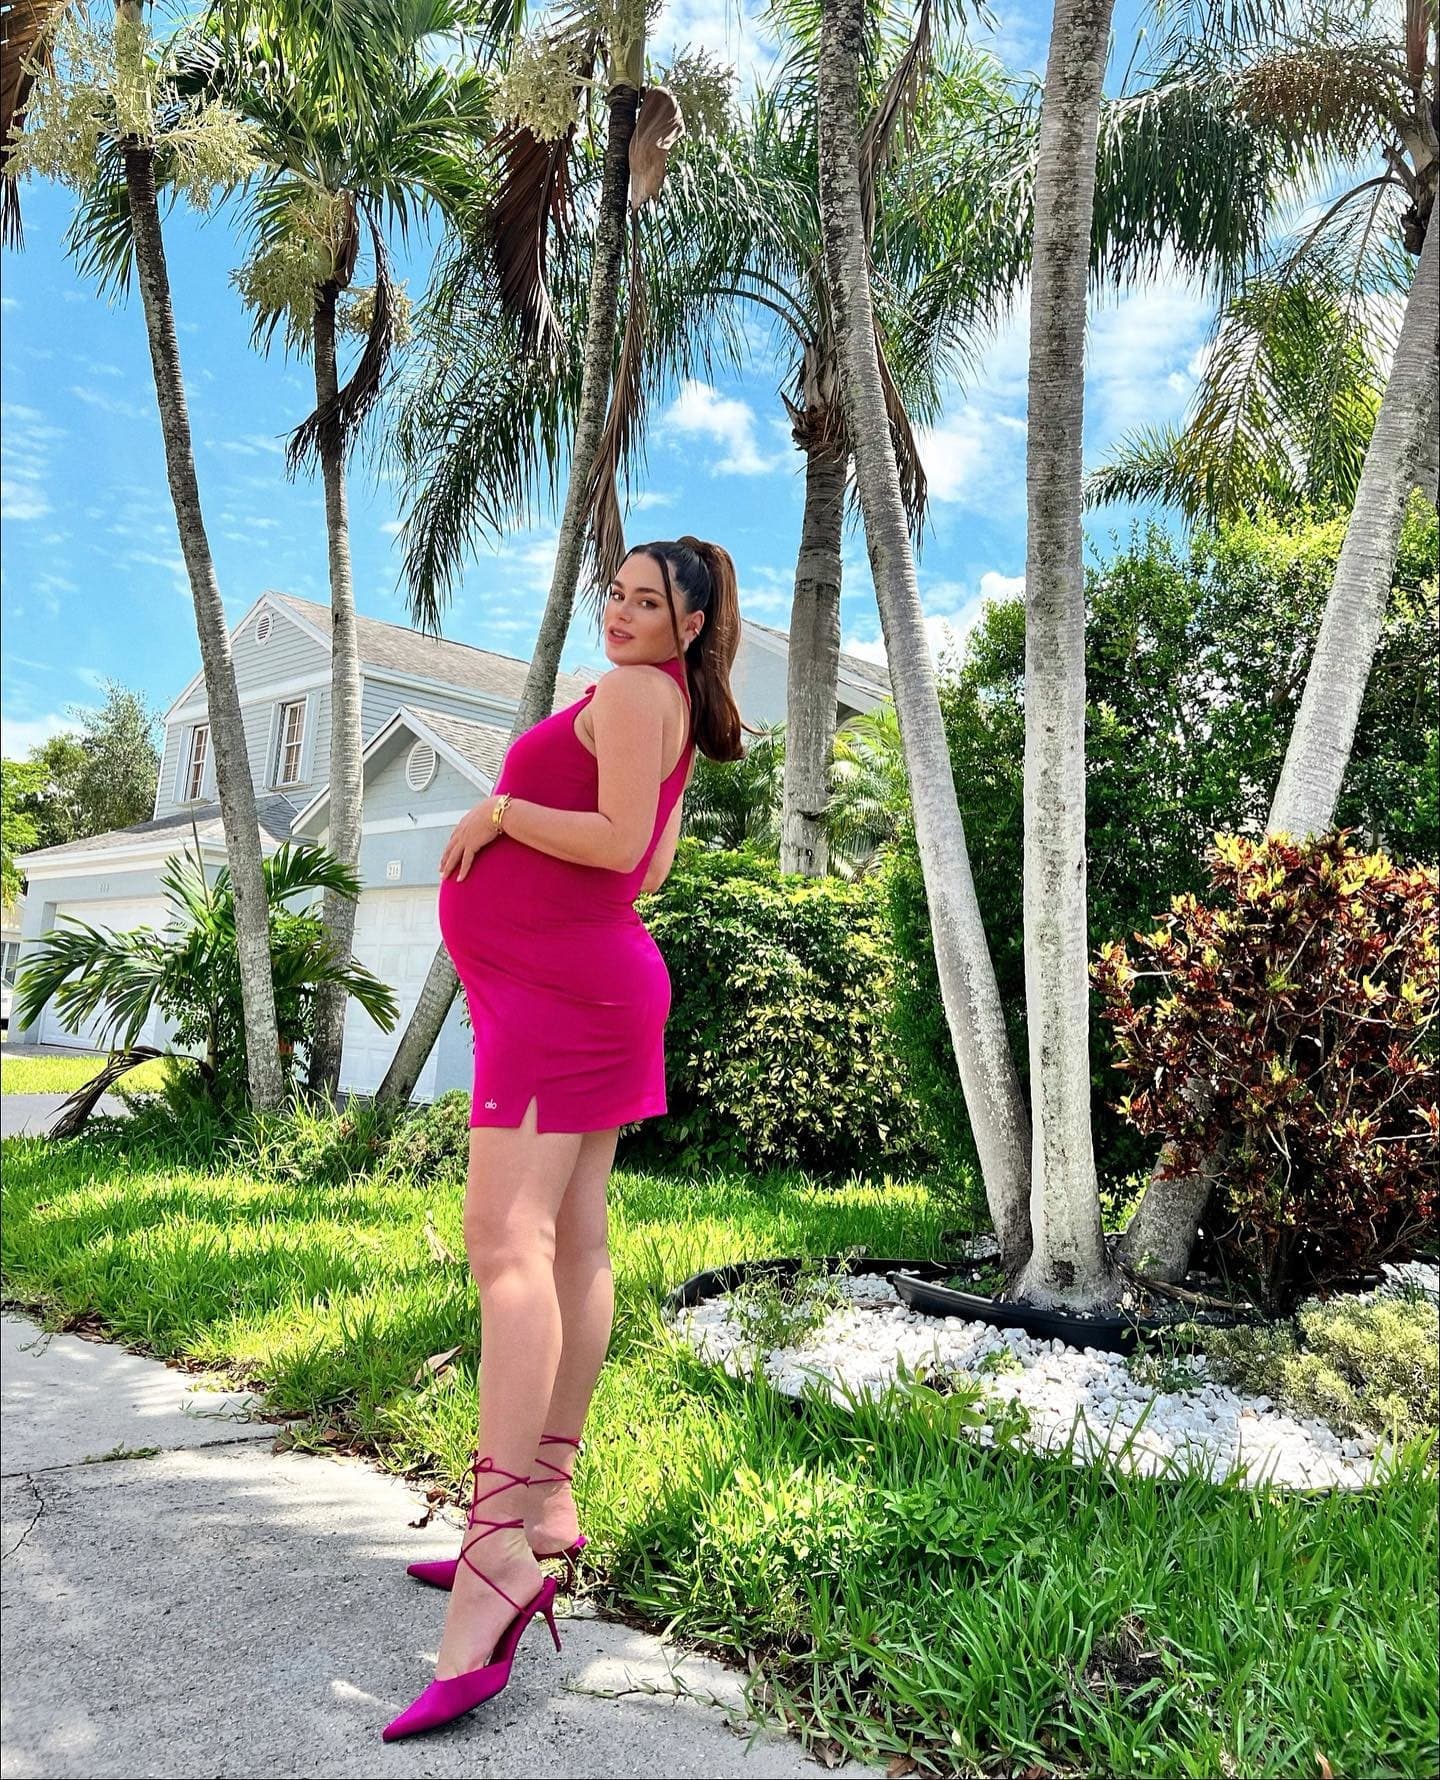 @stephistegman wearing a magenta collared tennis dress with a pair of matching high heels while posing with her hands on her pregnant belly in front of a patch of palm trees.  